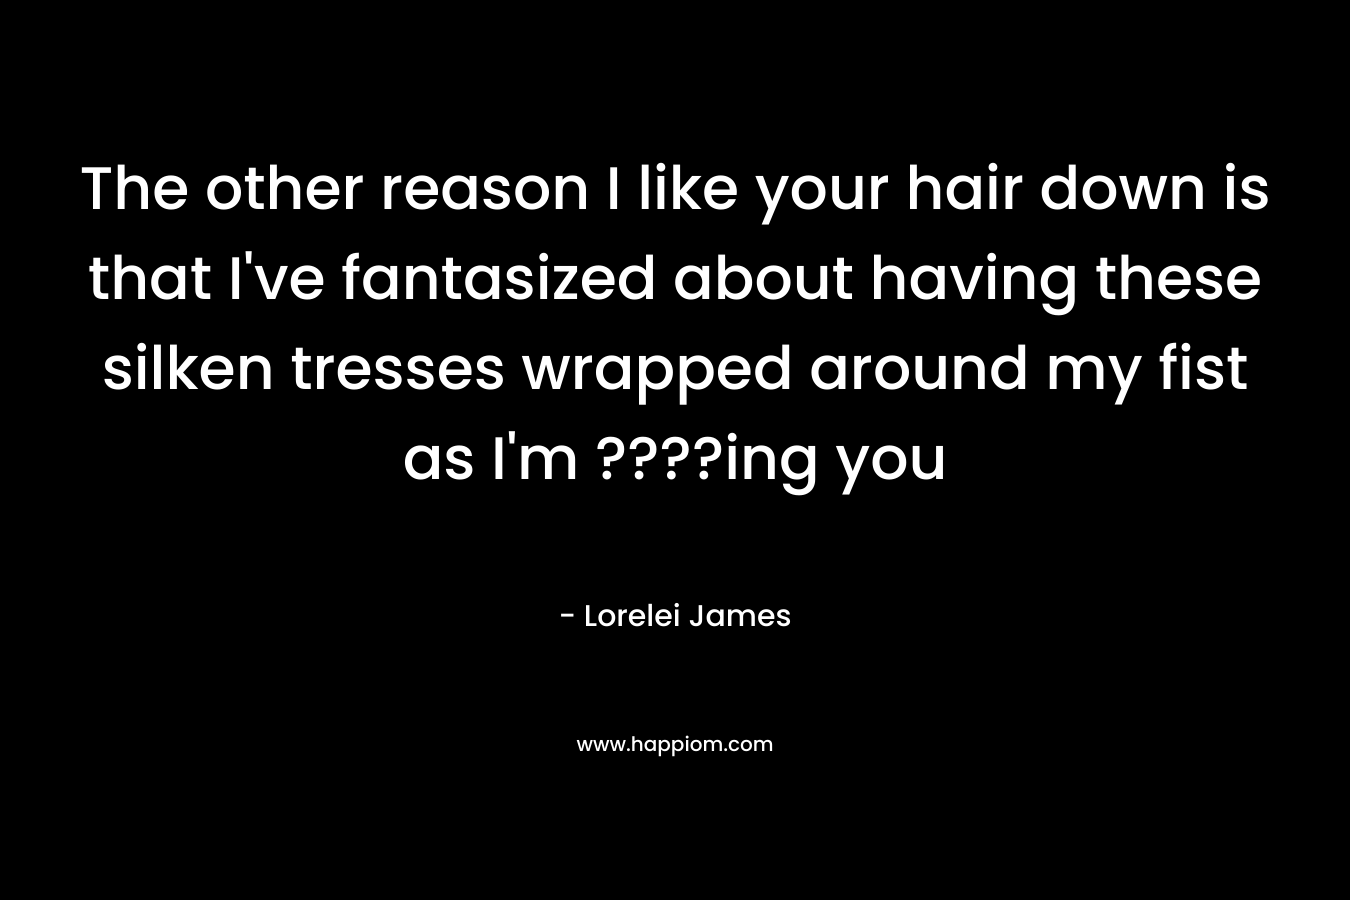 The other reason I like your hair down is that I’ve fantasized about having these silken tresses wrapped around my fist as I’m ????ing you – Lorelei James